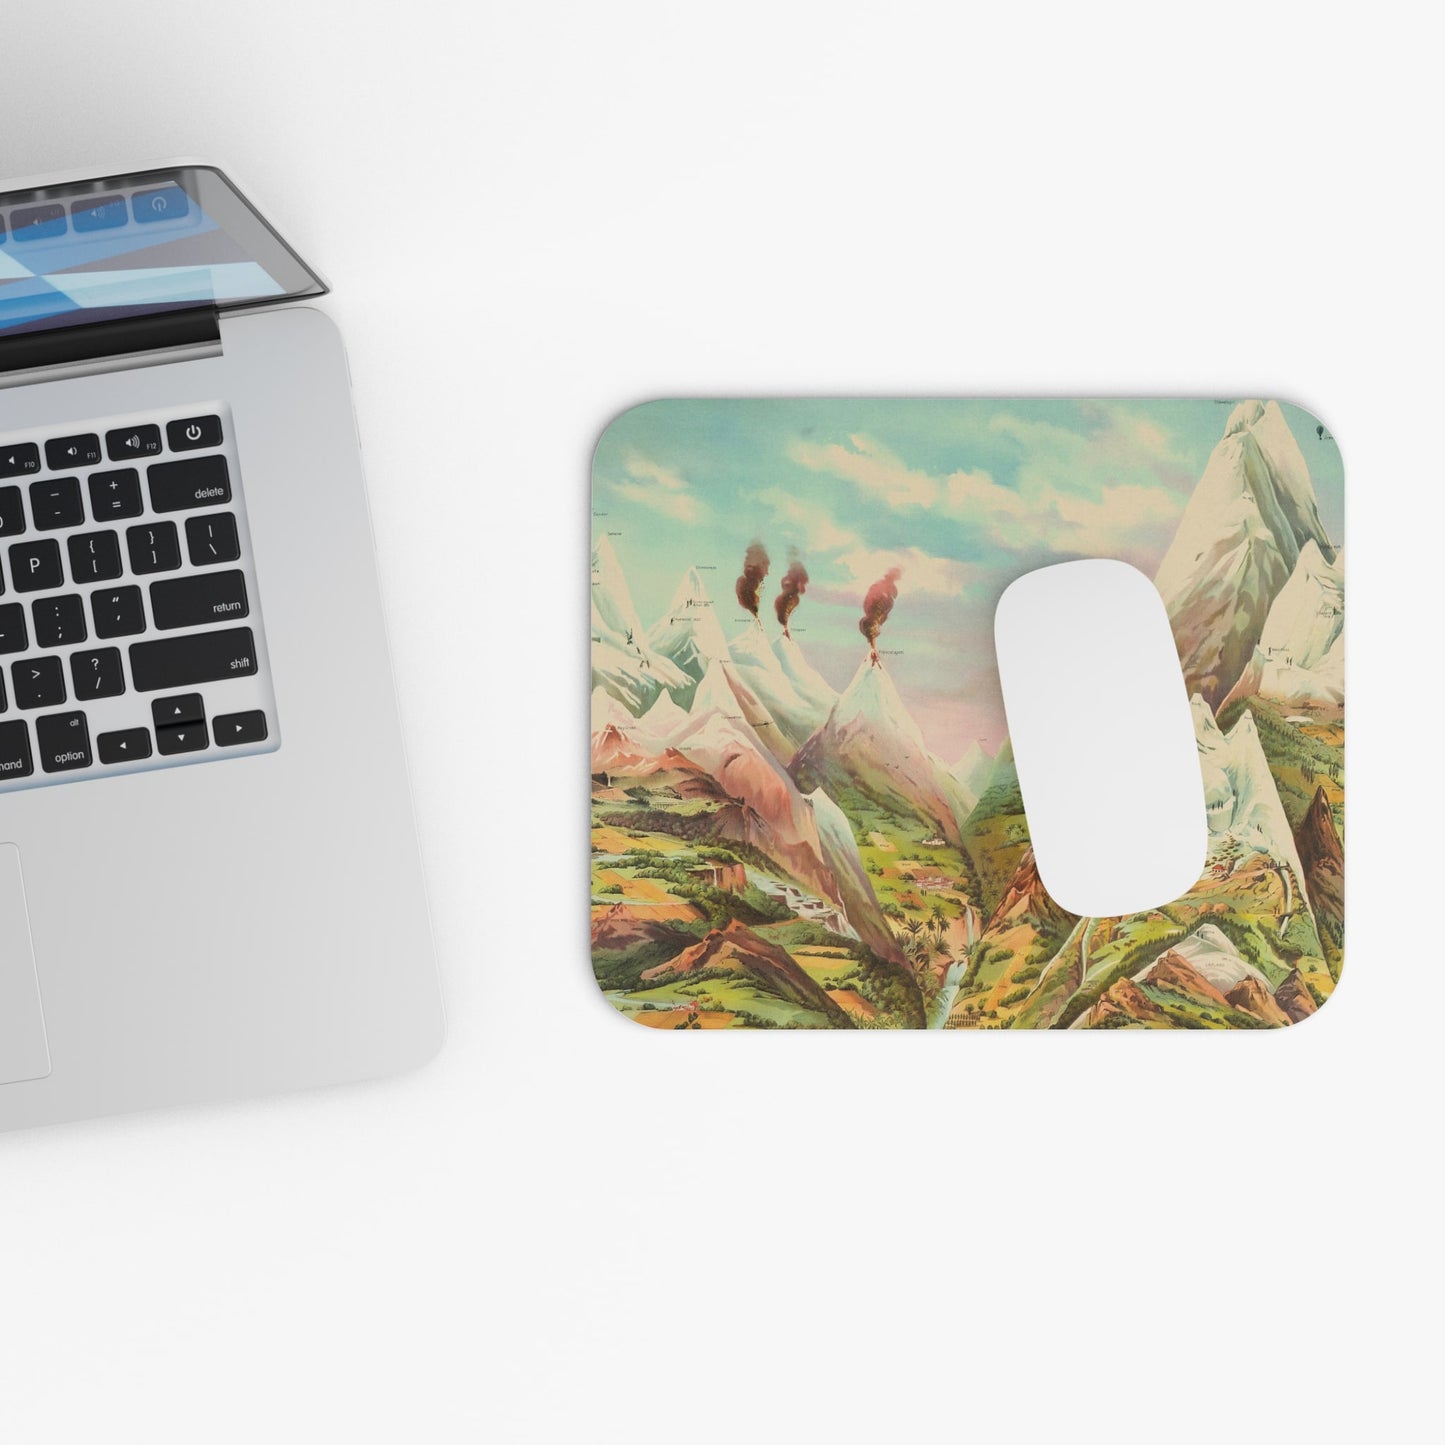 Vintage Cool Mountain Painting Design Laptop Mouse Pad with White Mouse